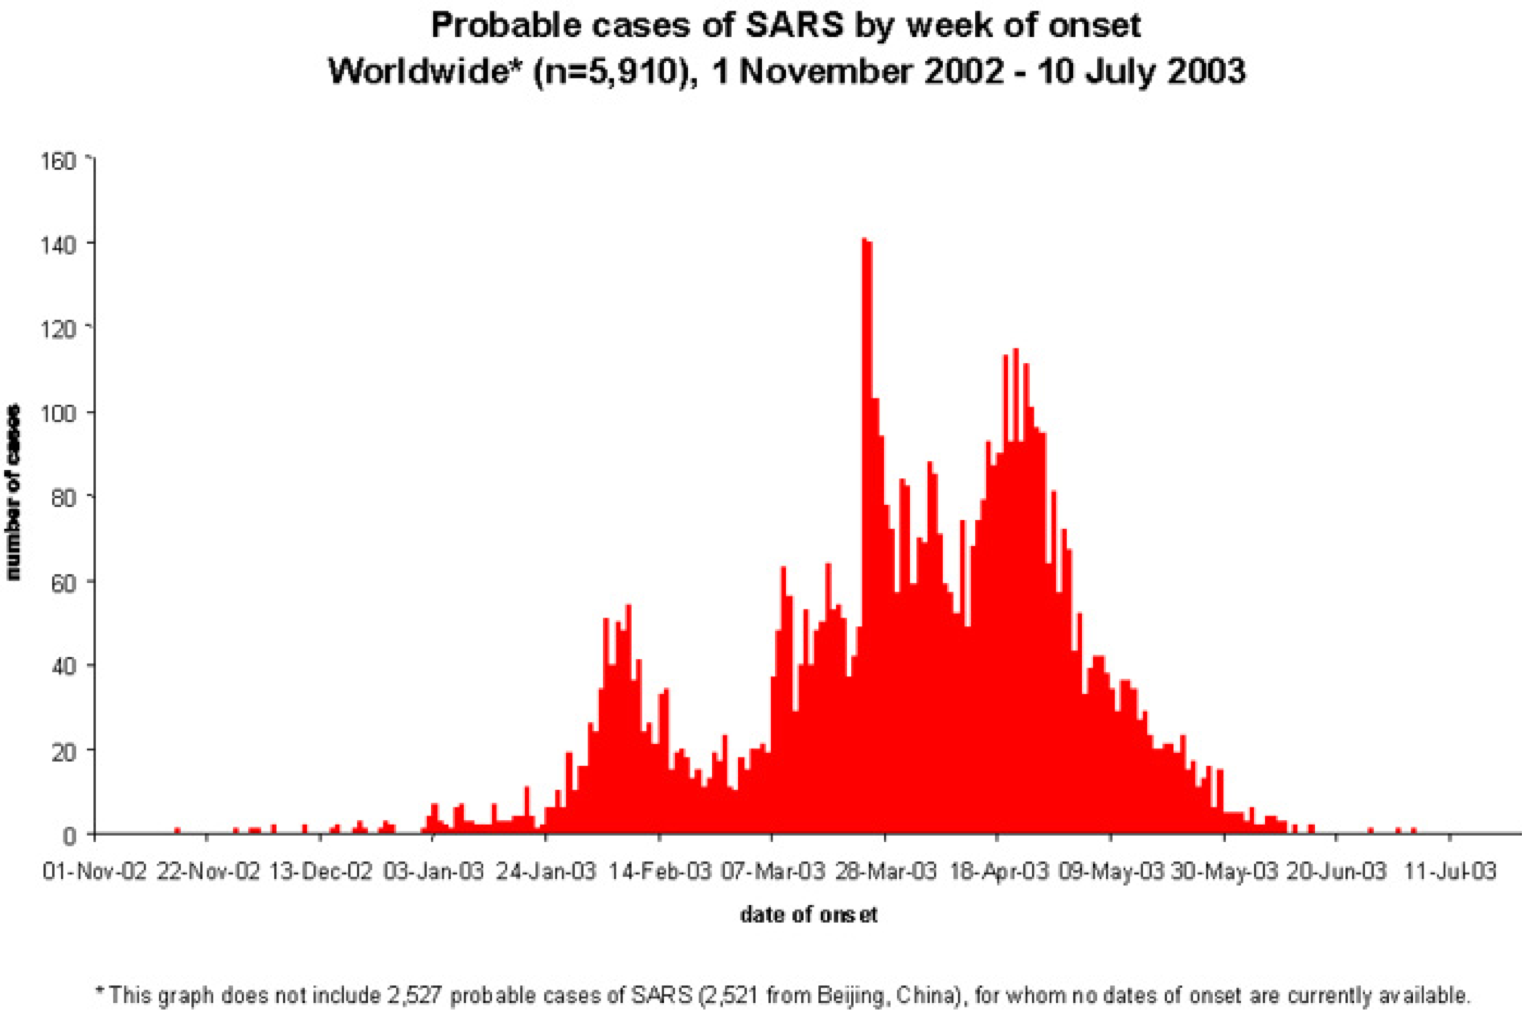 Graph showing probable cases of SARS